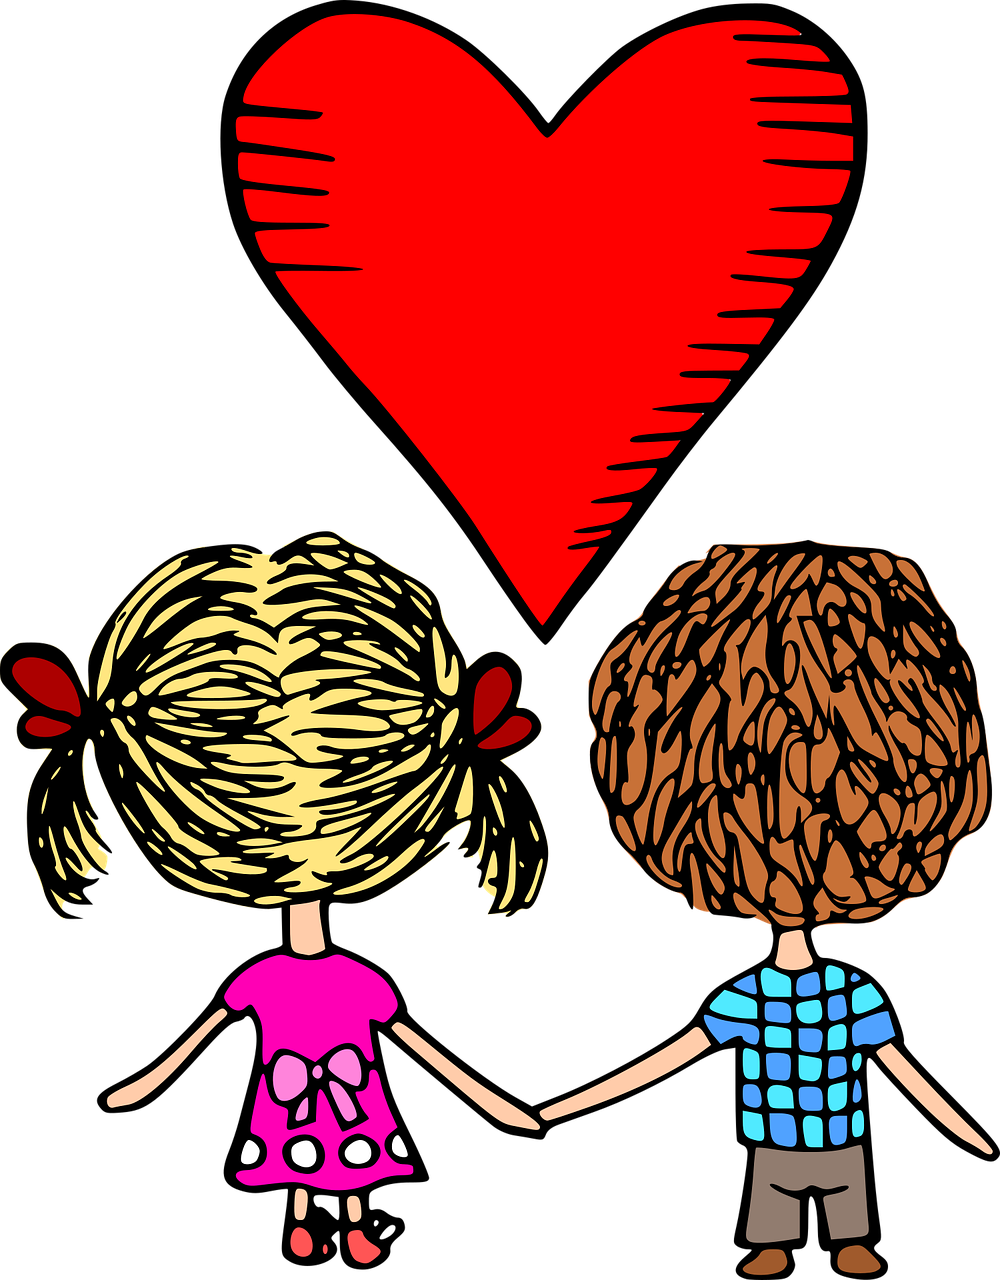 a couple of kids holding hands in front of a heart, a child's drawing, by Maria Helena Vieira da Silva, hair, on a flat color black background, cartoon image, two girls